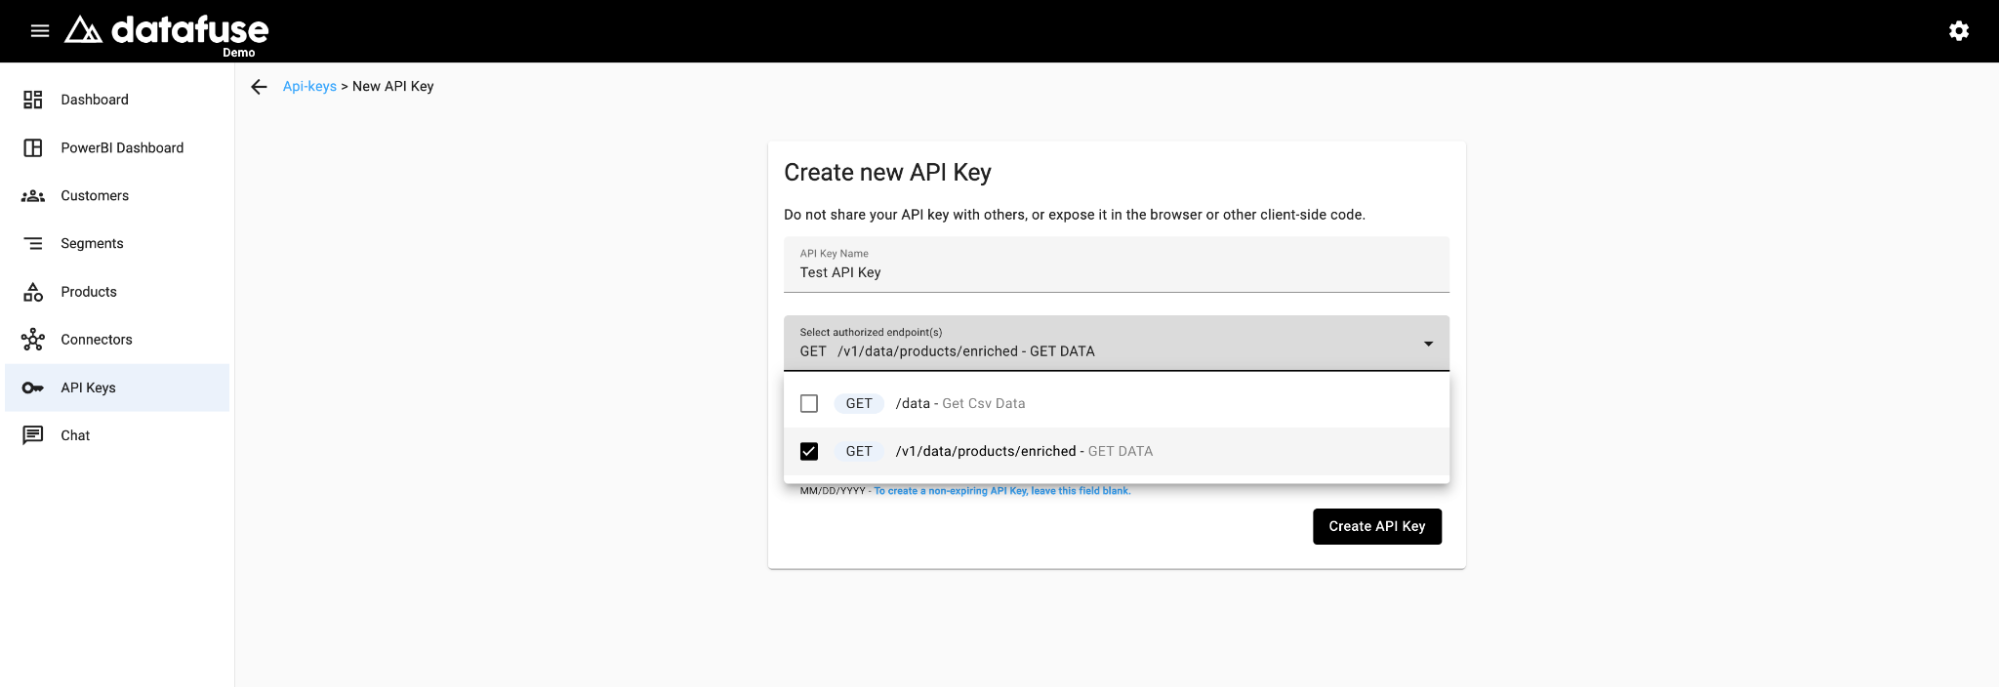 API Key Name and Endpoints